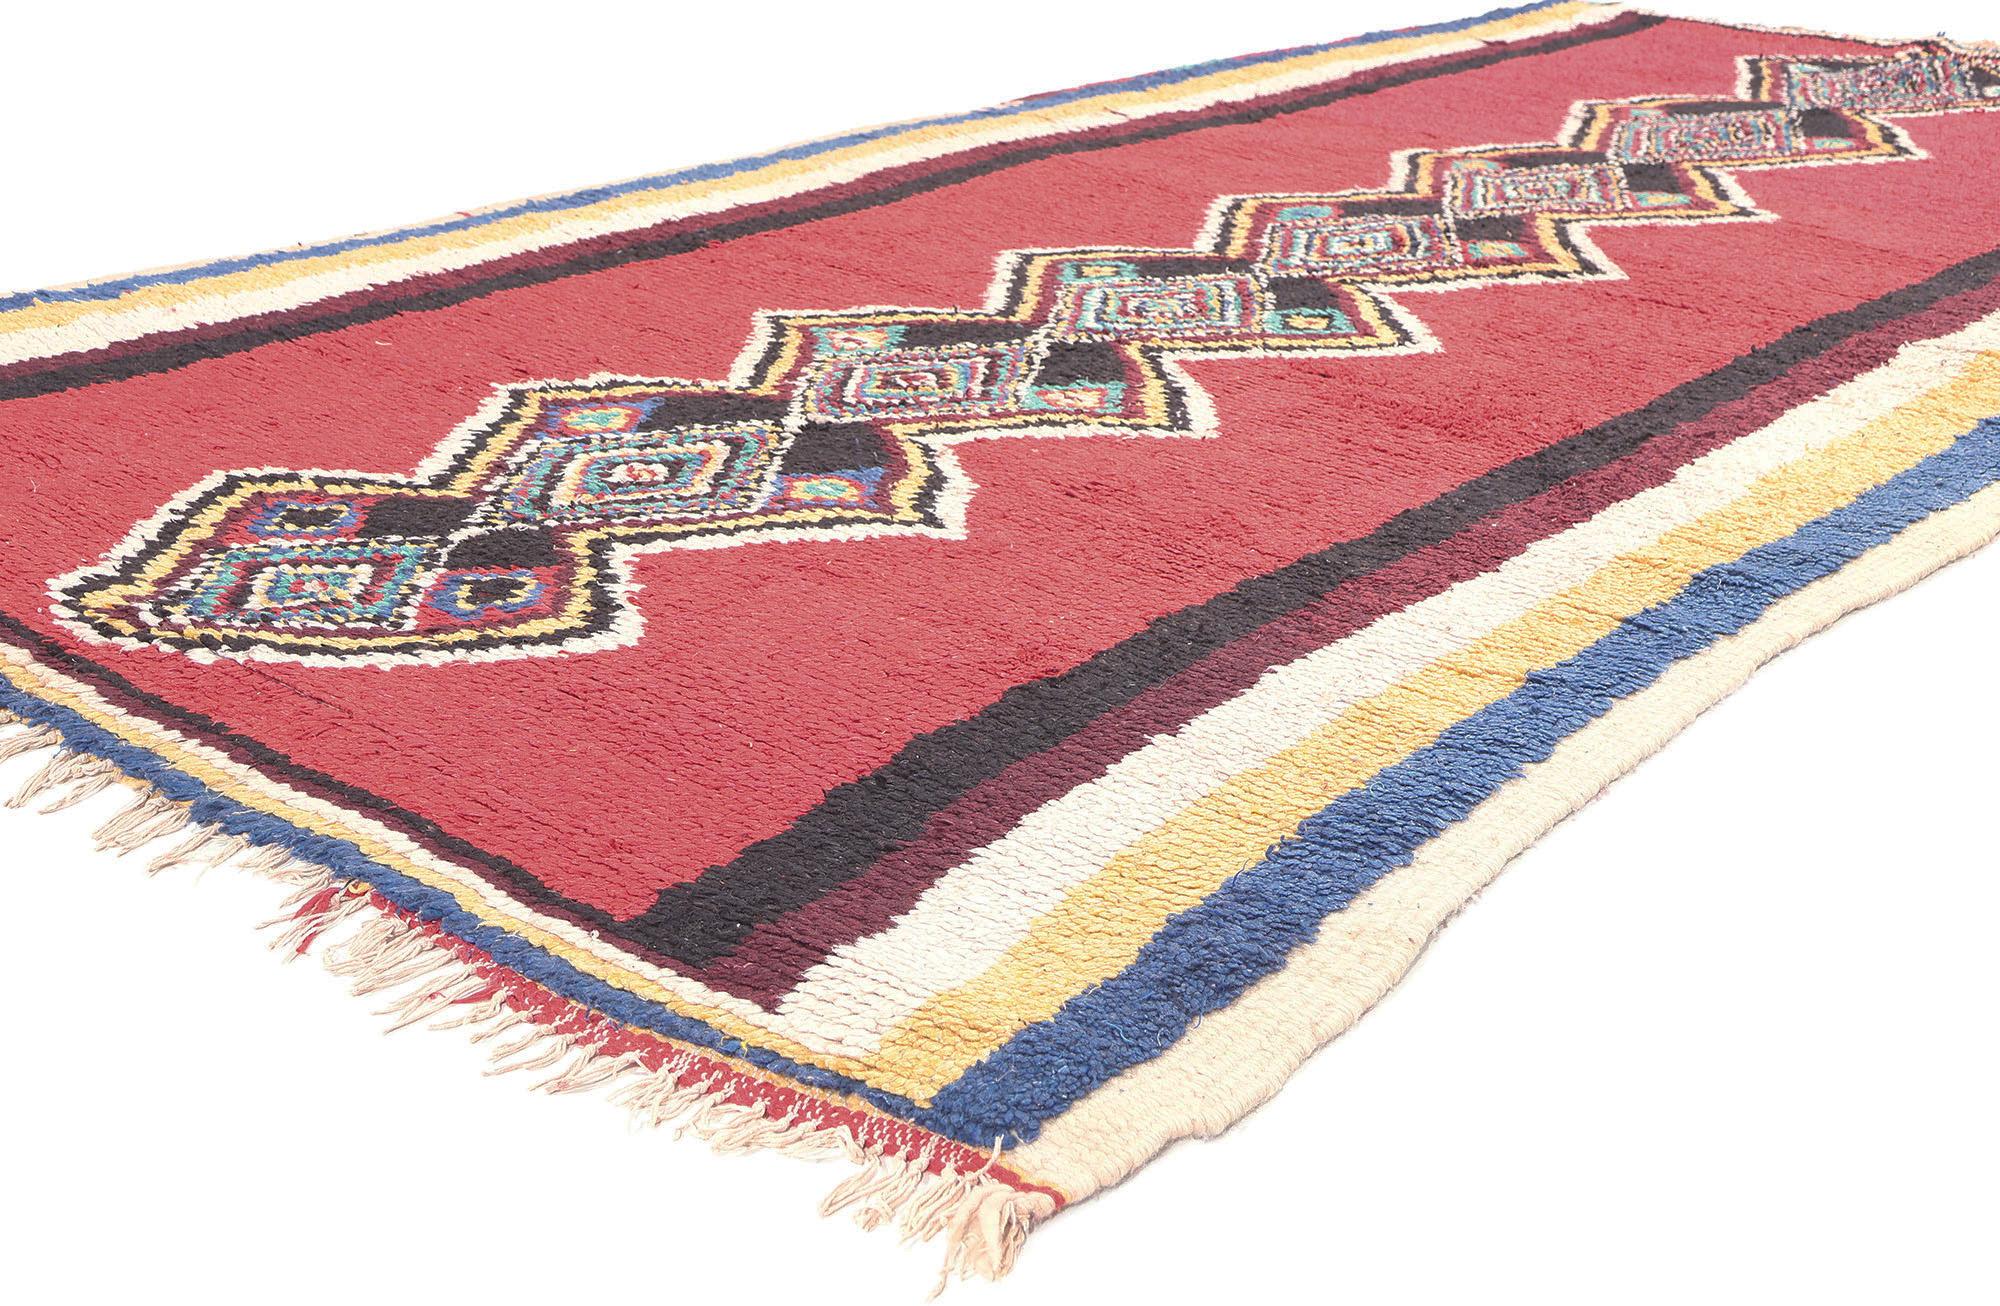 20466 Vintage Red Moroccan Rug, 05'00 x 09'04. Intricately hand-knotted, this hand knotted wool vintage Berber Moroccan rug showcases a timeless design—a single column adorned with eight concentric diamonds, each filled with a series of expanding